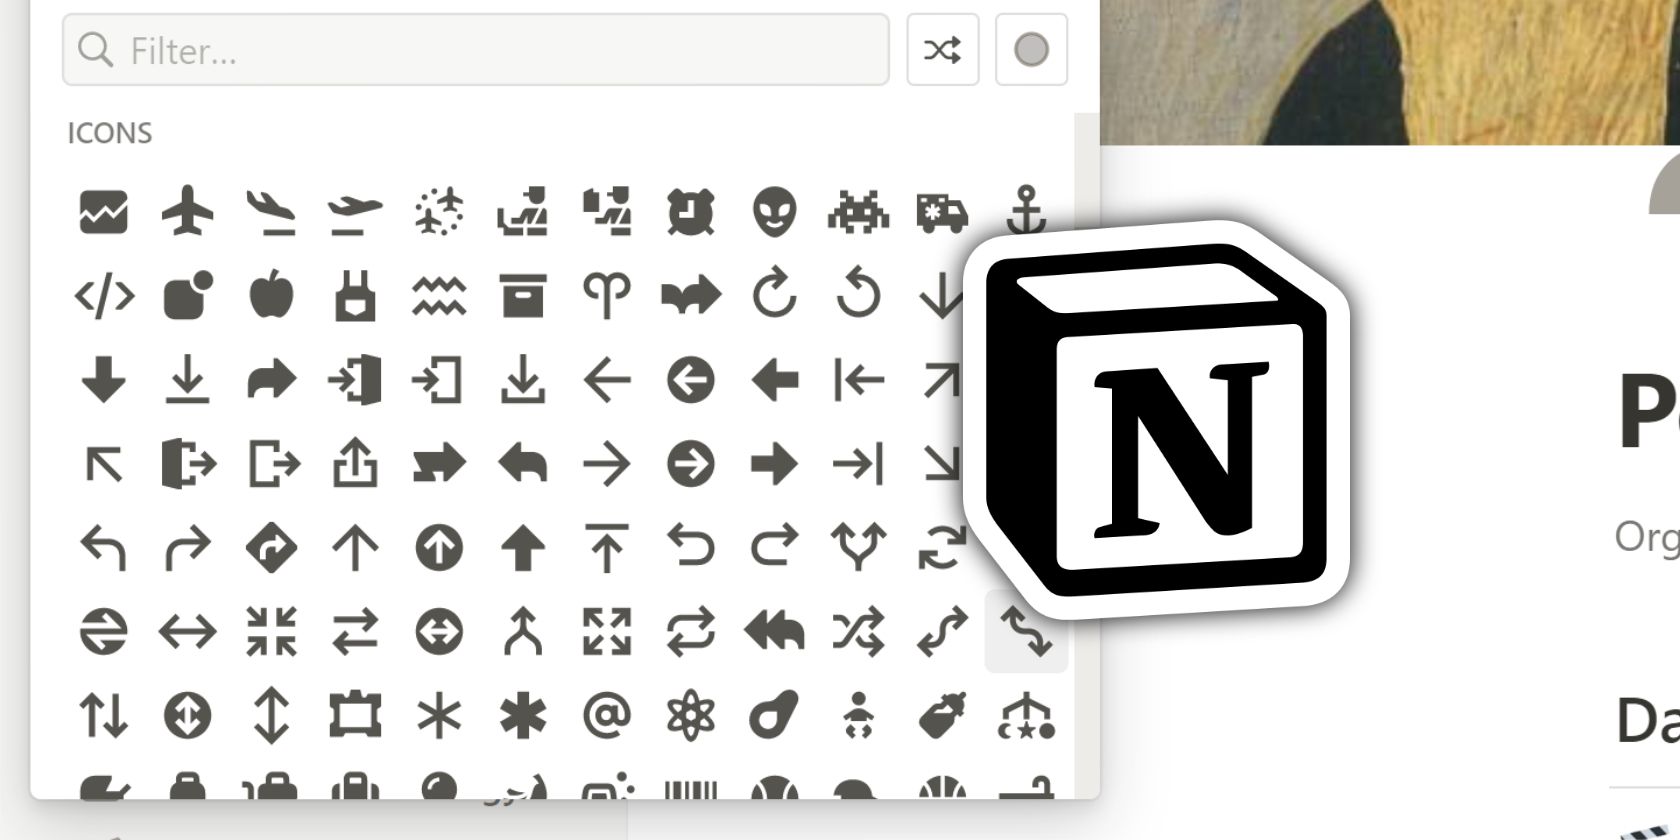 An image showing the selection of icons available in Notion, next to the product's logo.